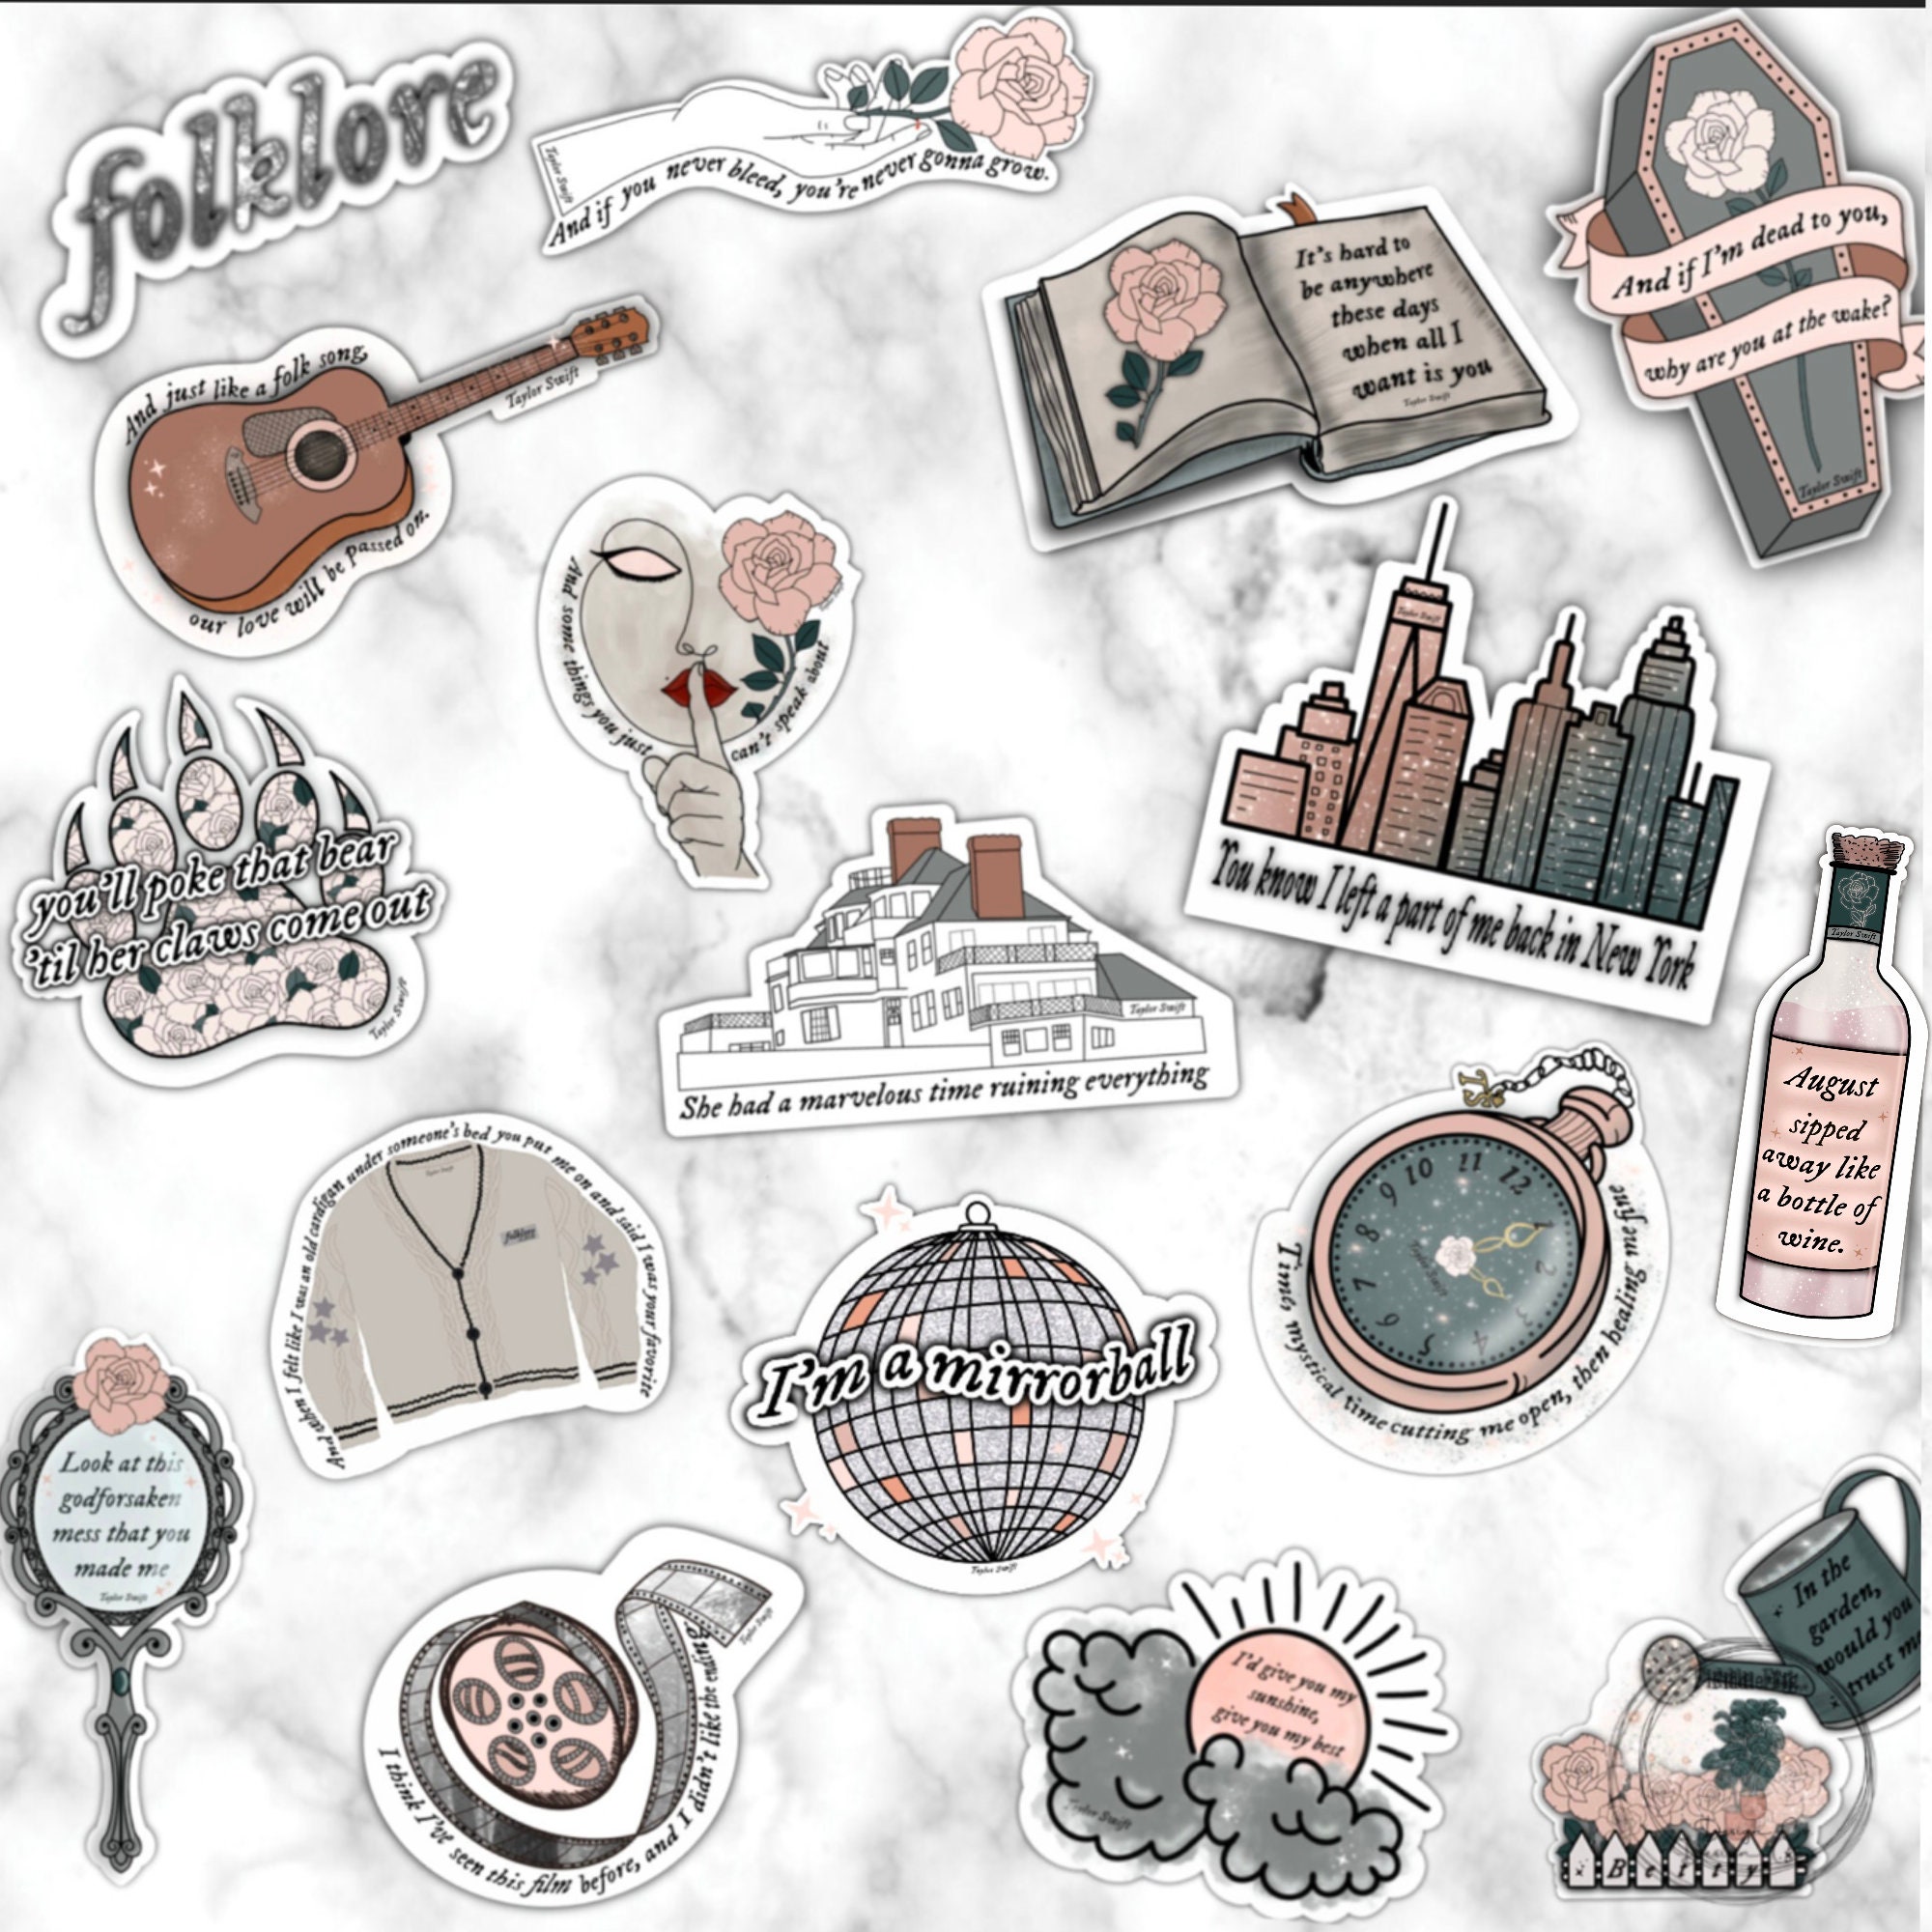  50PCS Taylor Music Stickers, Swift Album Stickers for